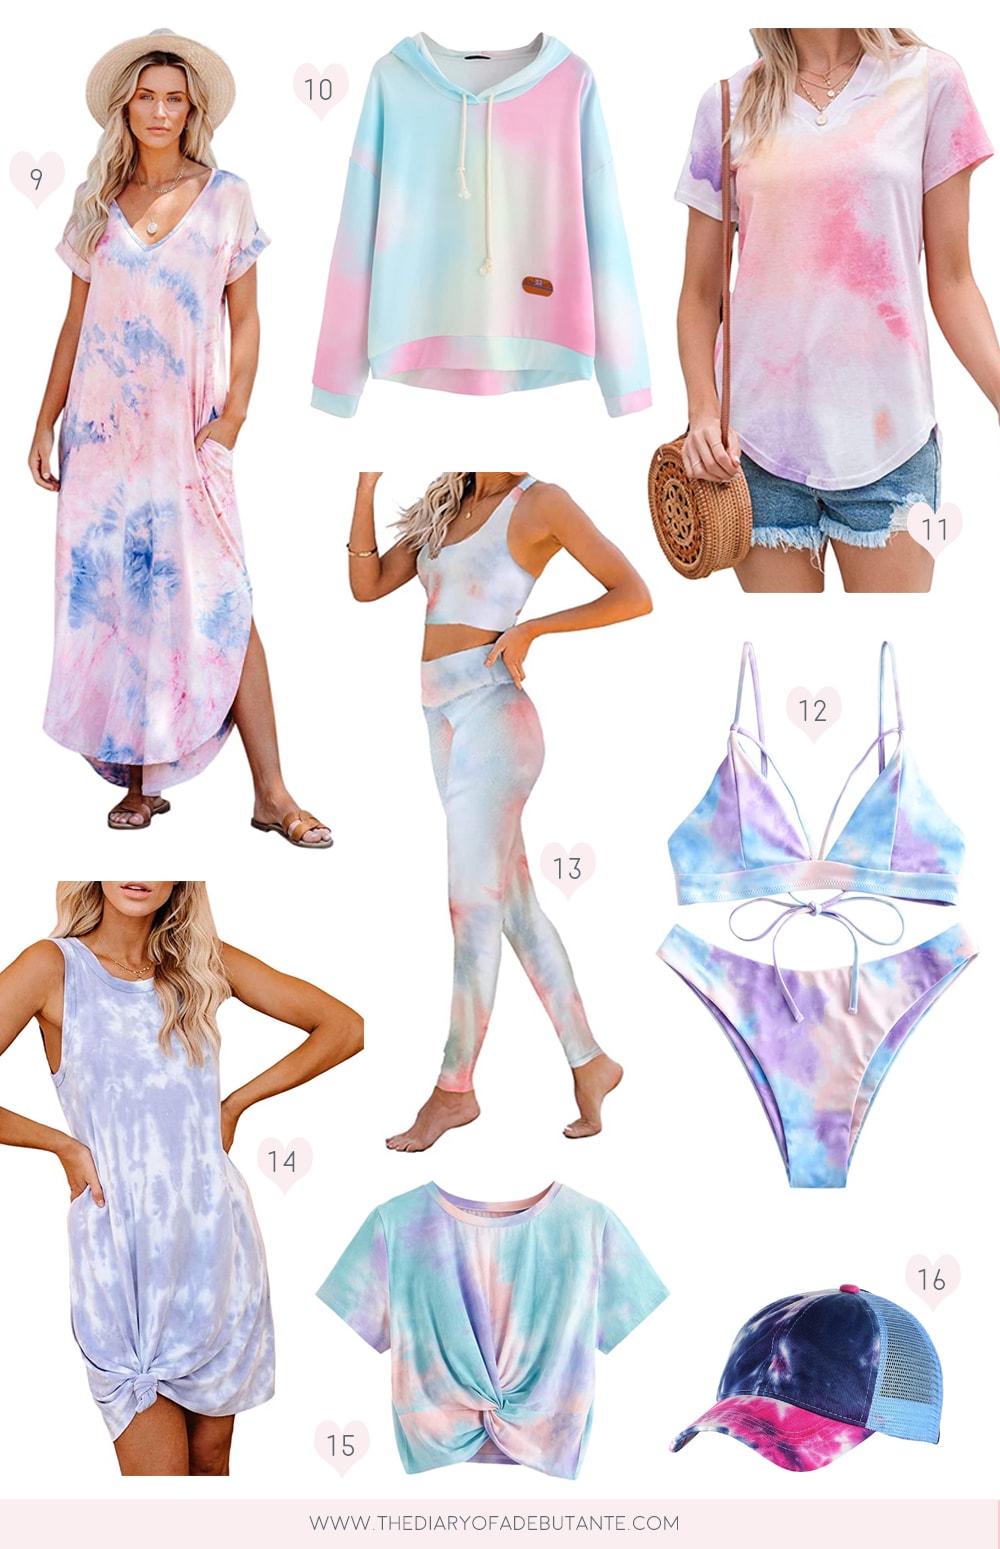 Affordable fashion blogger Stephanie Ziajka shares 8 more ways to wear tie dye on Diary of a Debutante